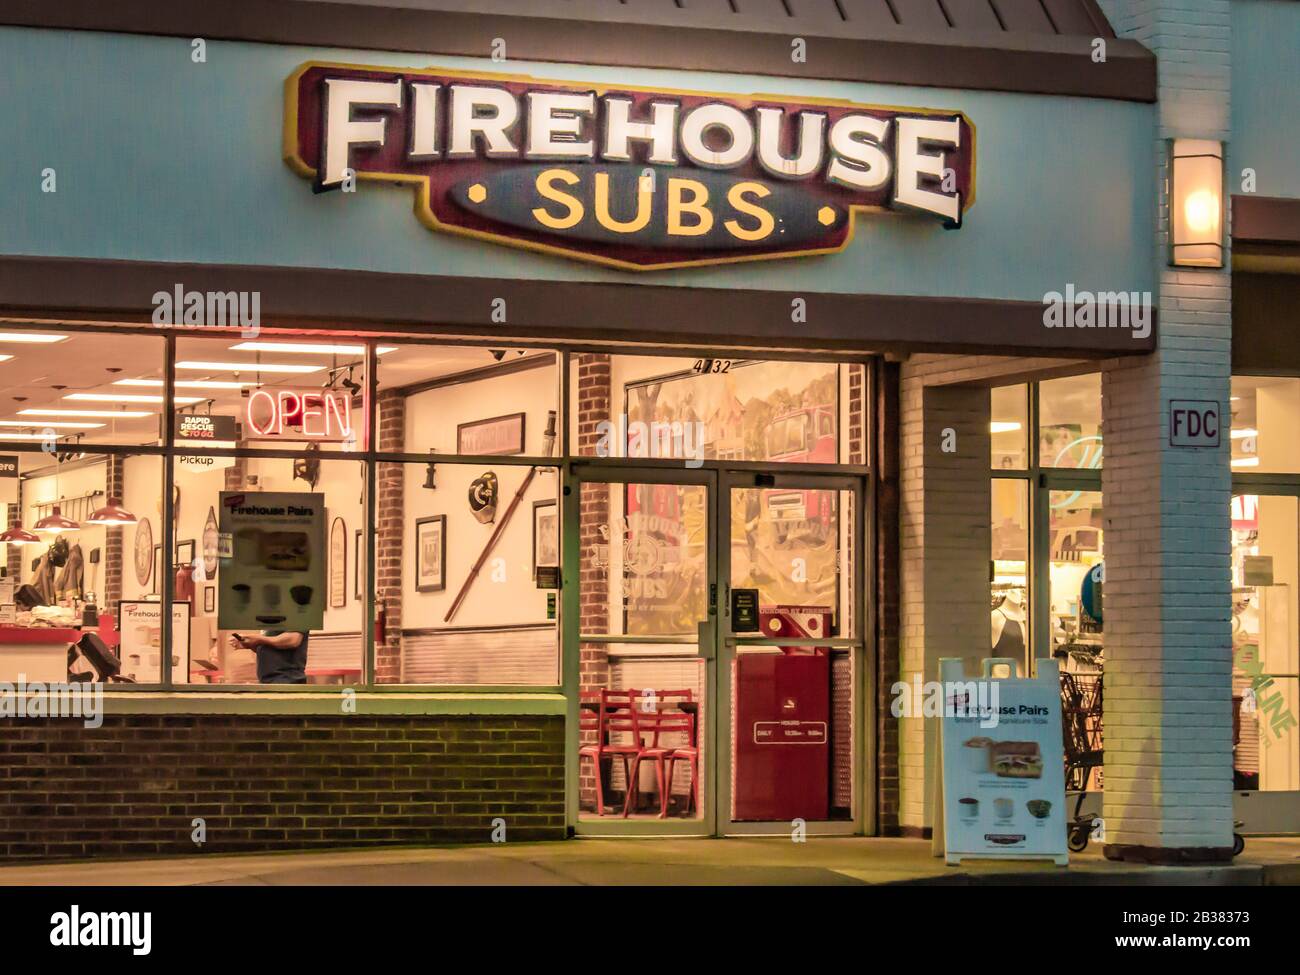 Charlotte, NC/USA - November 15, 2019: Horizontal shot of 'Firehouse Subs' sandwich shop showing brand/logo with lit sign and brightly lit interior. Stock Photo